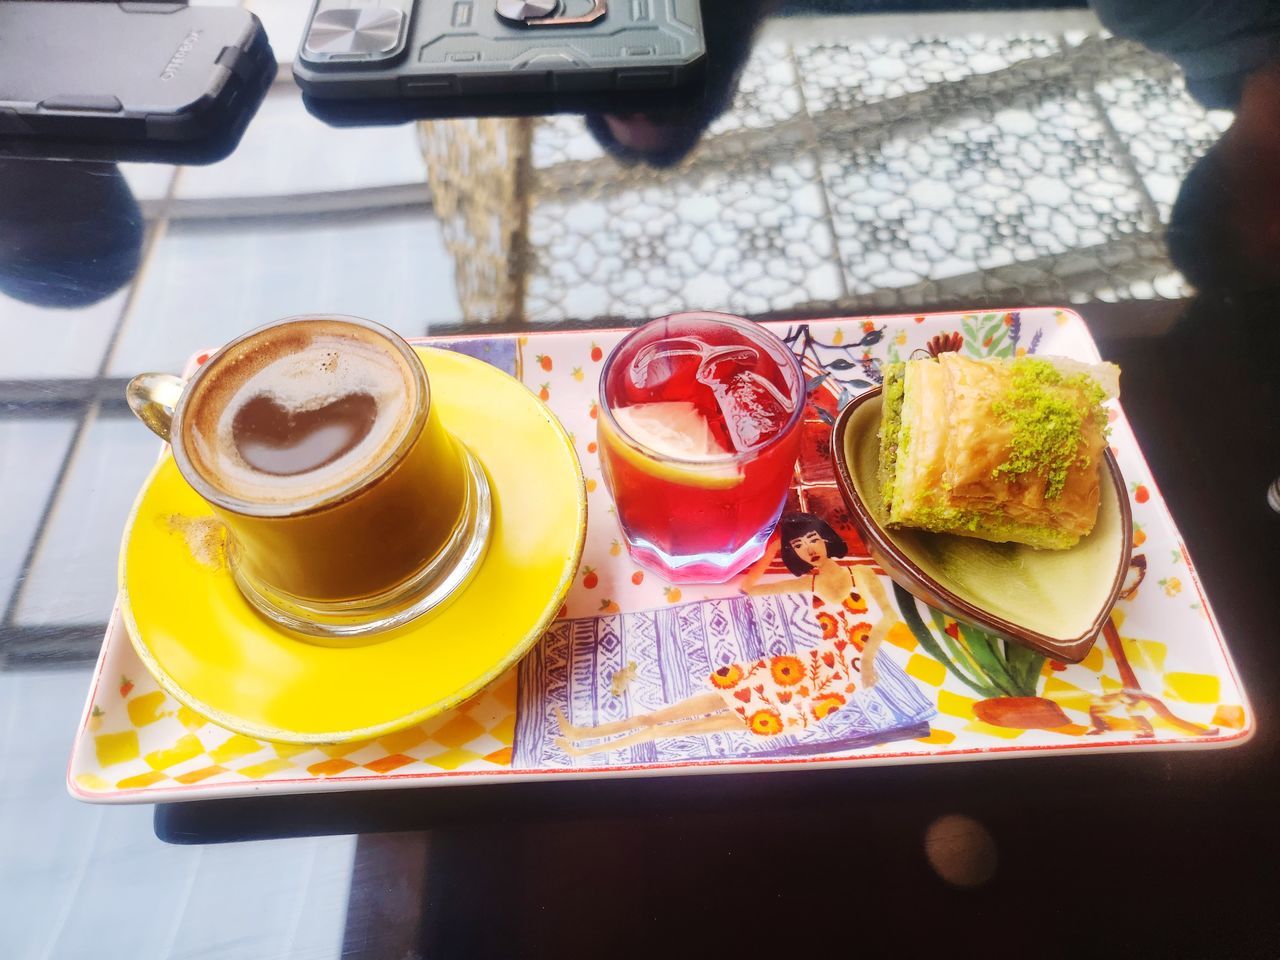 food and drink, food, drink, meal, high angle view, refreshment, table, freshness, cup, mug, coffee, yellow, lunch, healthy eating, breakfast, plate, indoors, coffee cup, fruit, crockery, fast food, brunch, household equipment, wellbeing, hot drink, no people, dish, day, still life, tray